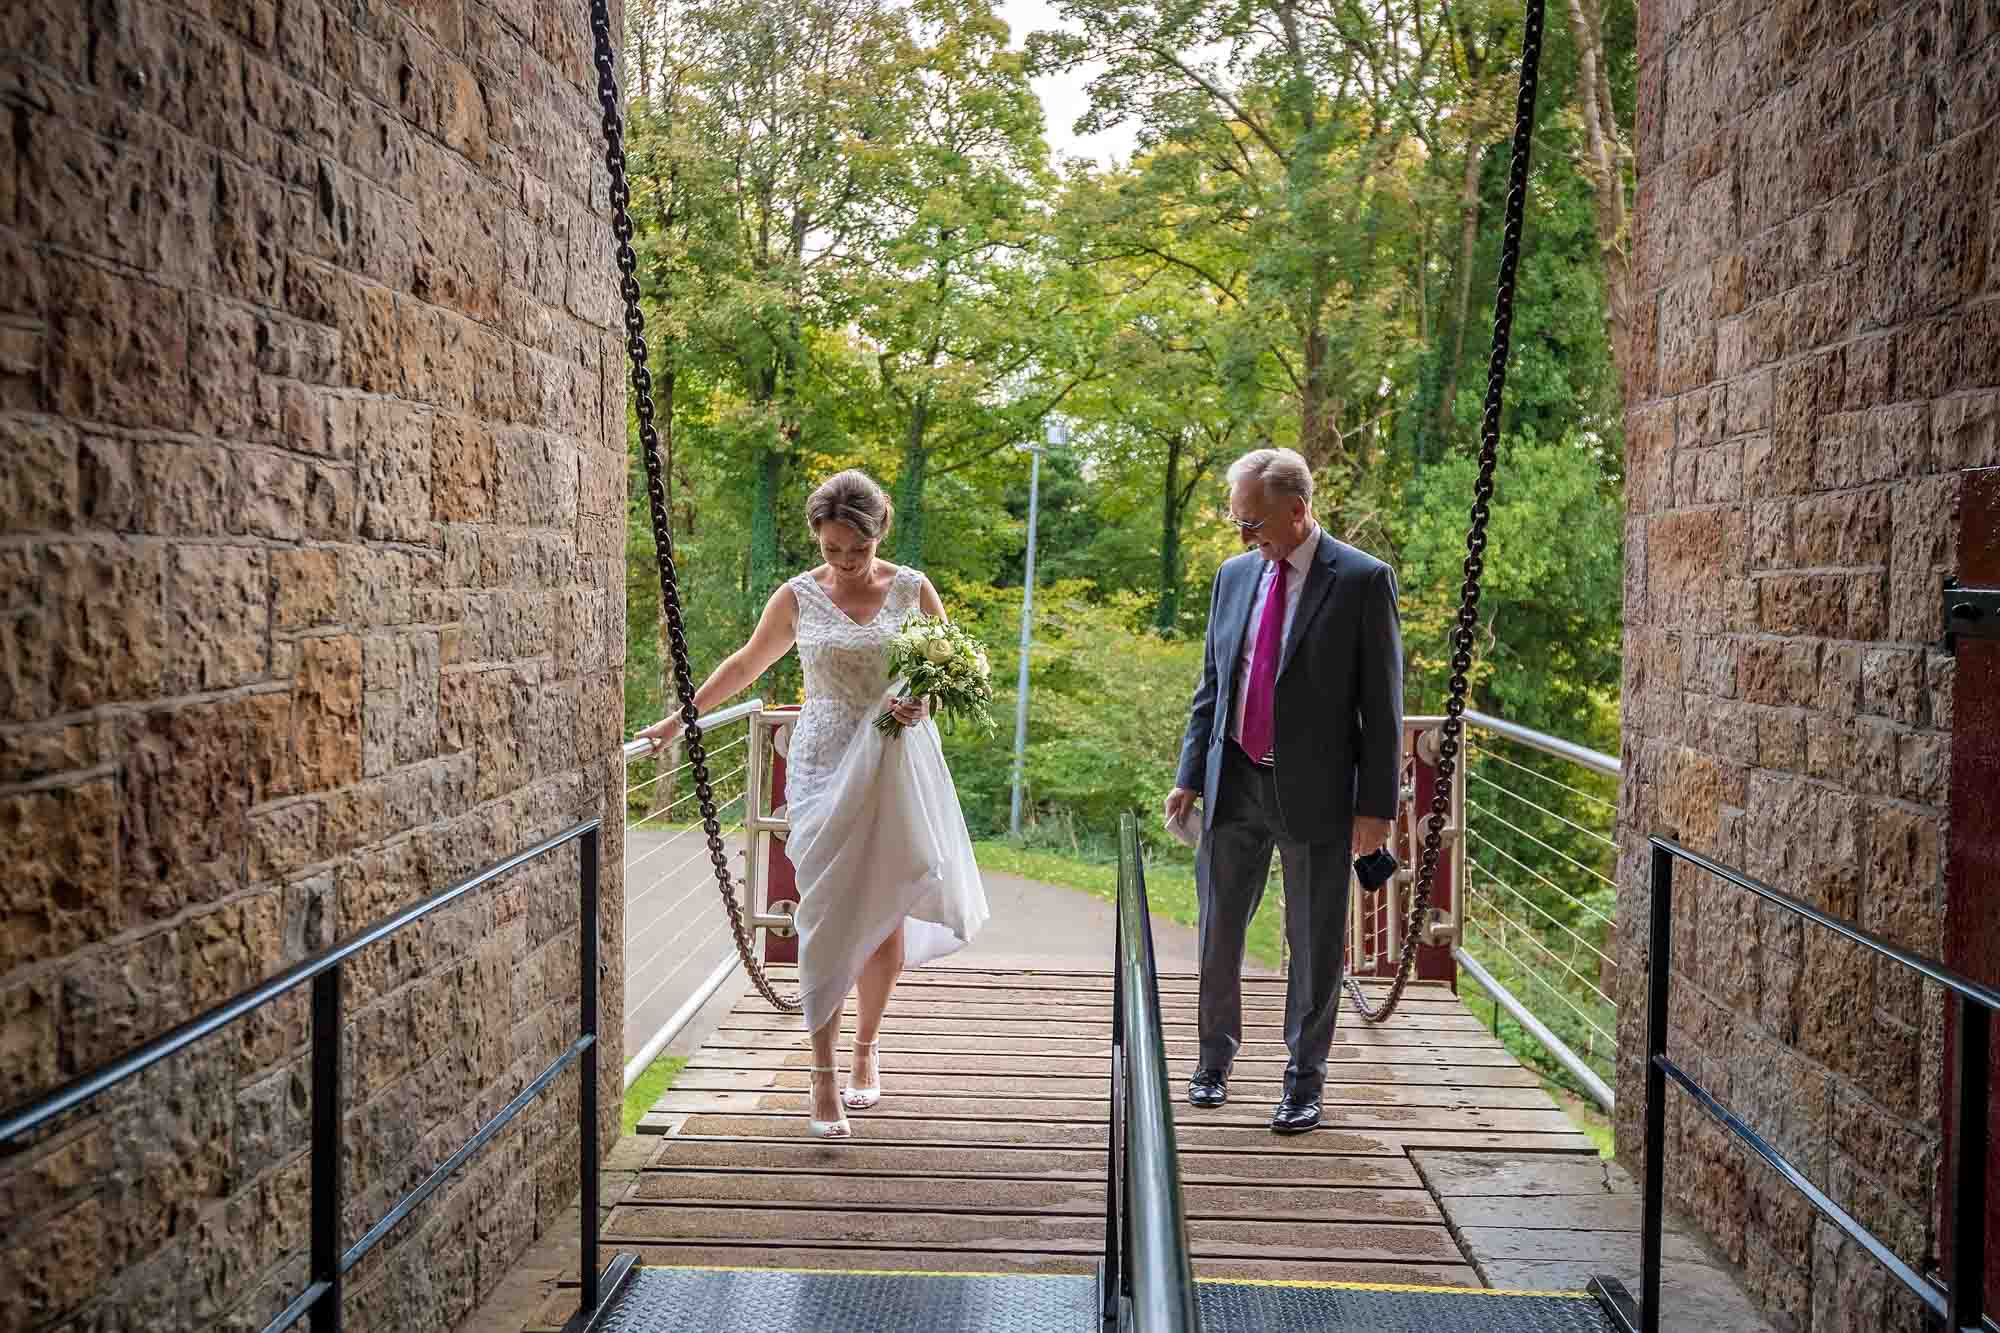 The bride's father admires her as they cross the drawbridge at Castell Coch